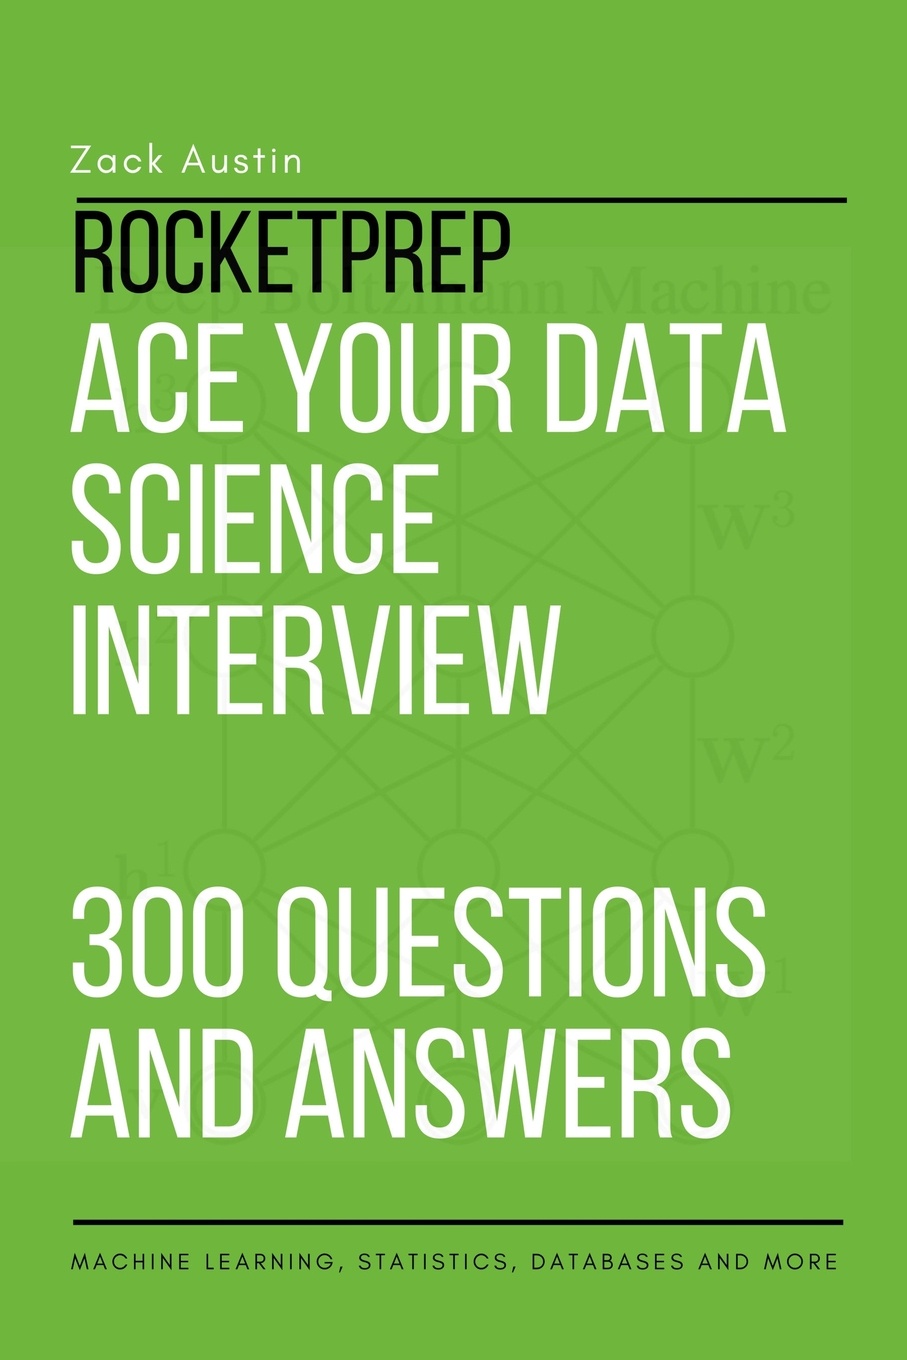 RocketPrep Ace Your Data Science Interview 300 Practice Questions and Answers. Machine Learning, Statistics, Databases and More